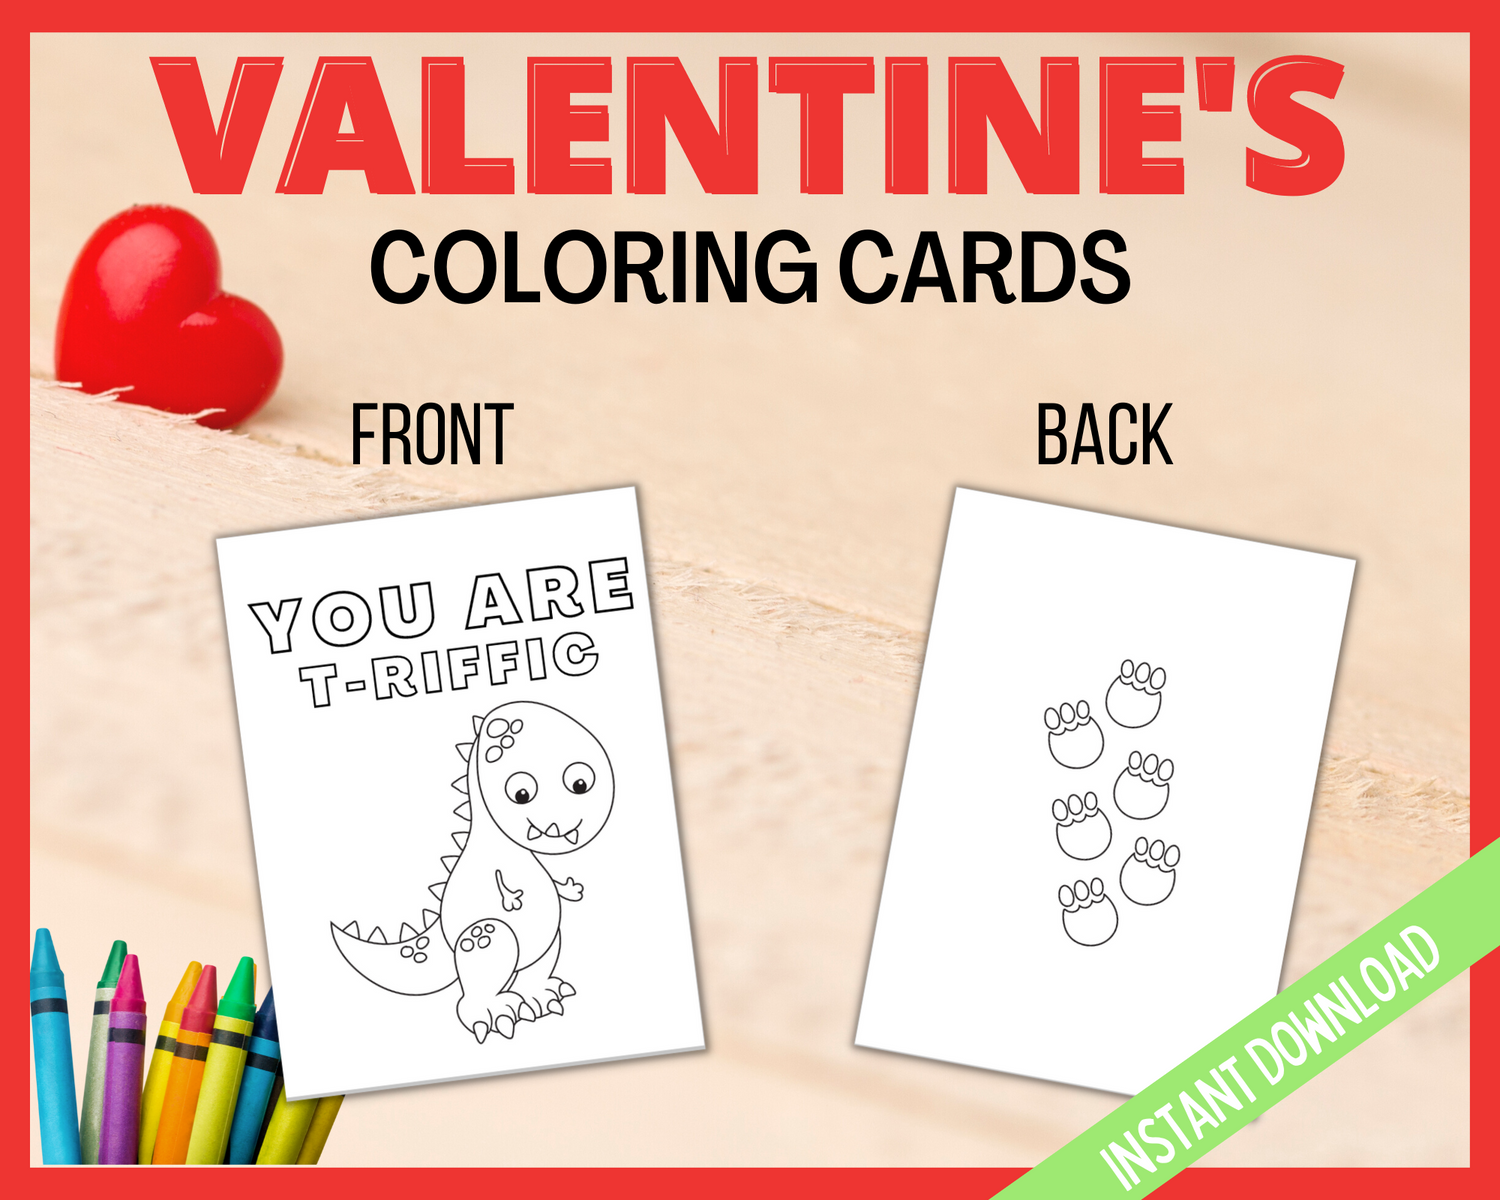 Valentines coloring cards for kids printable